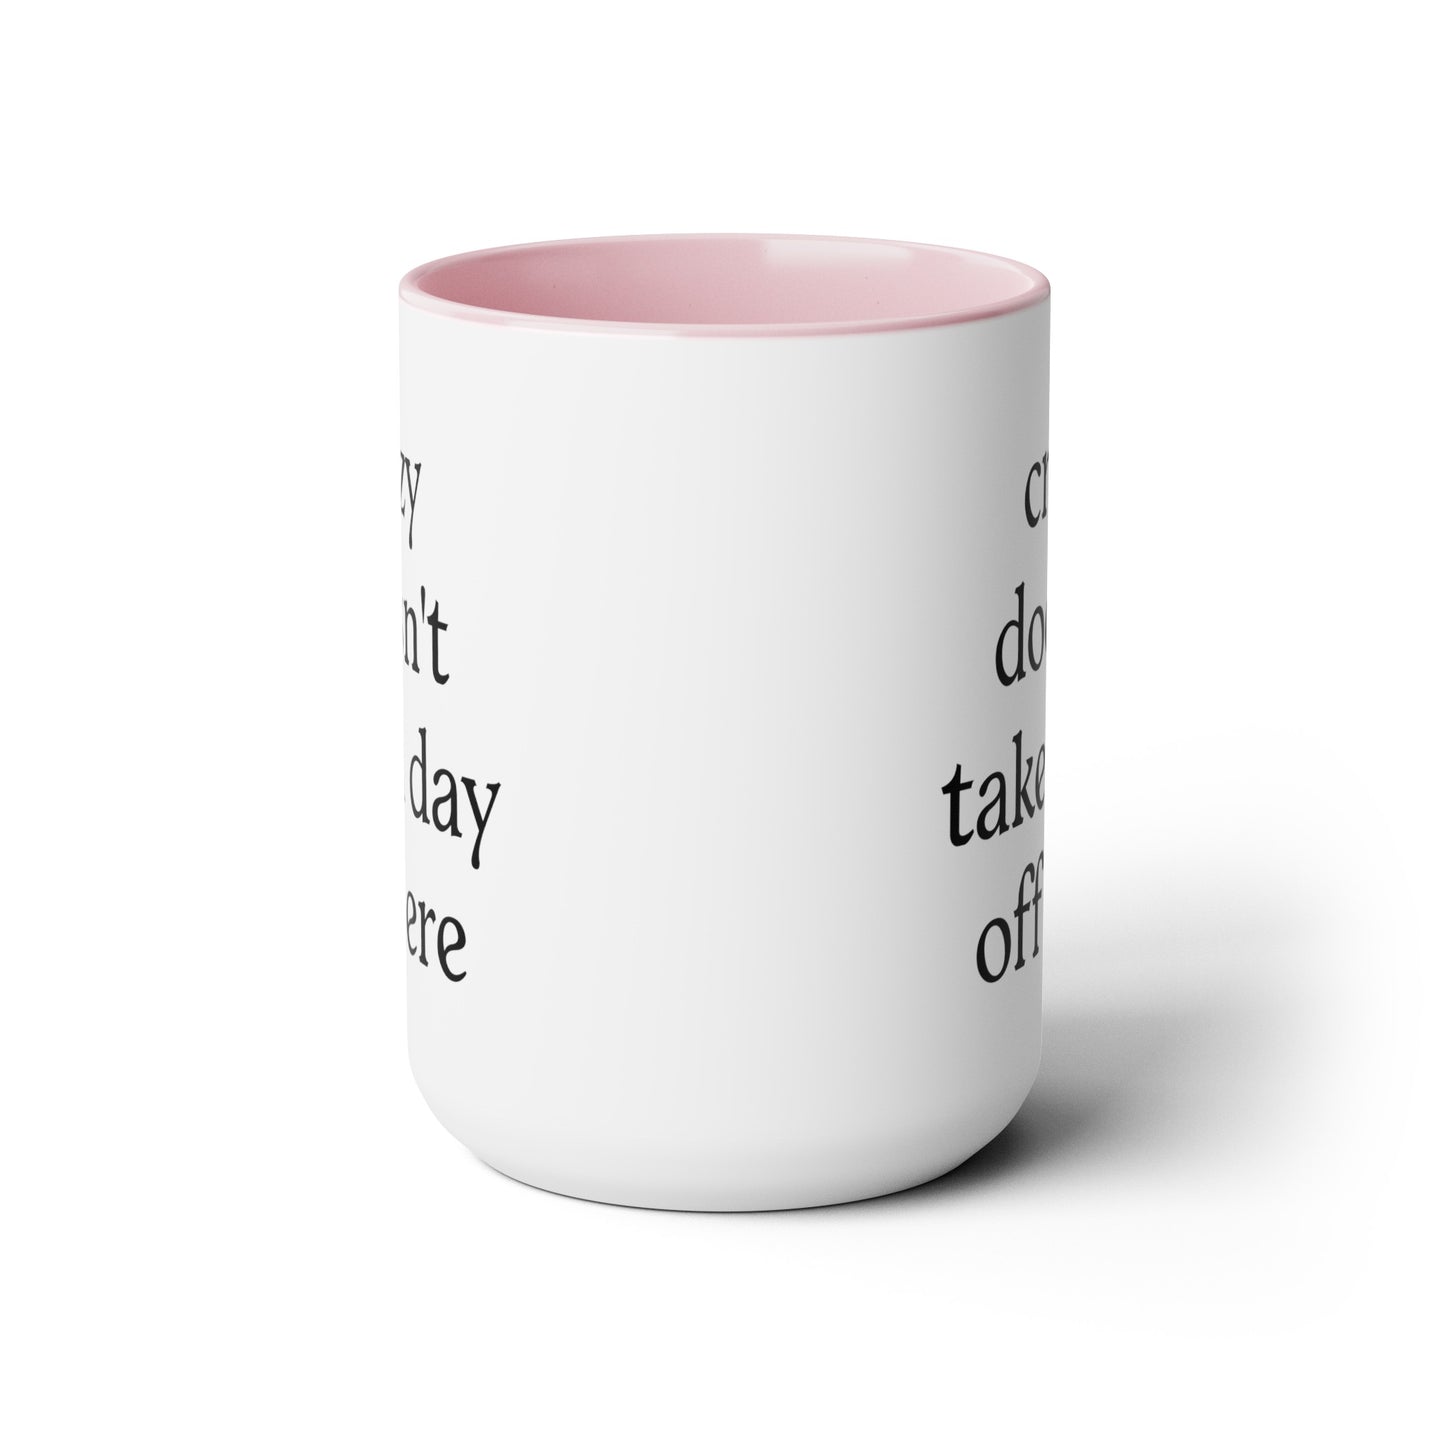 Crazy Doesn't Take a Day Off Here Mug 15 oz